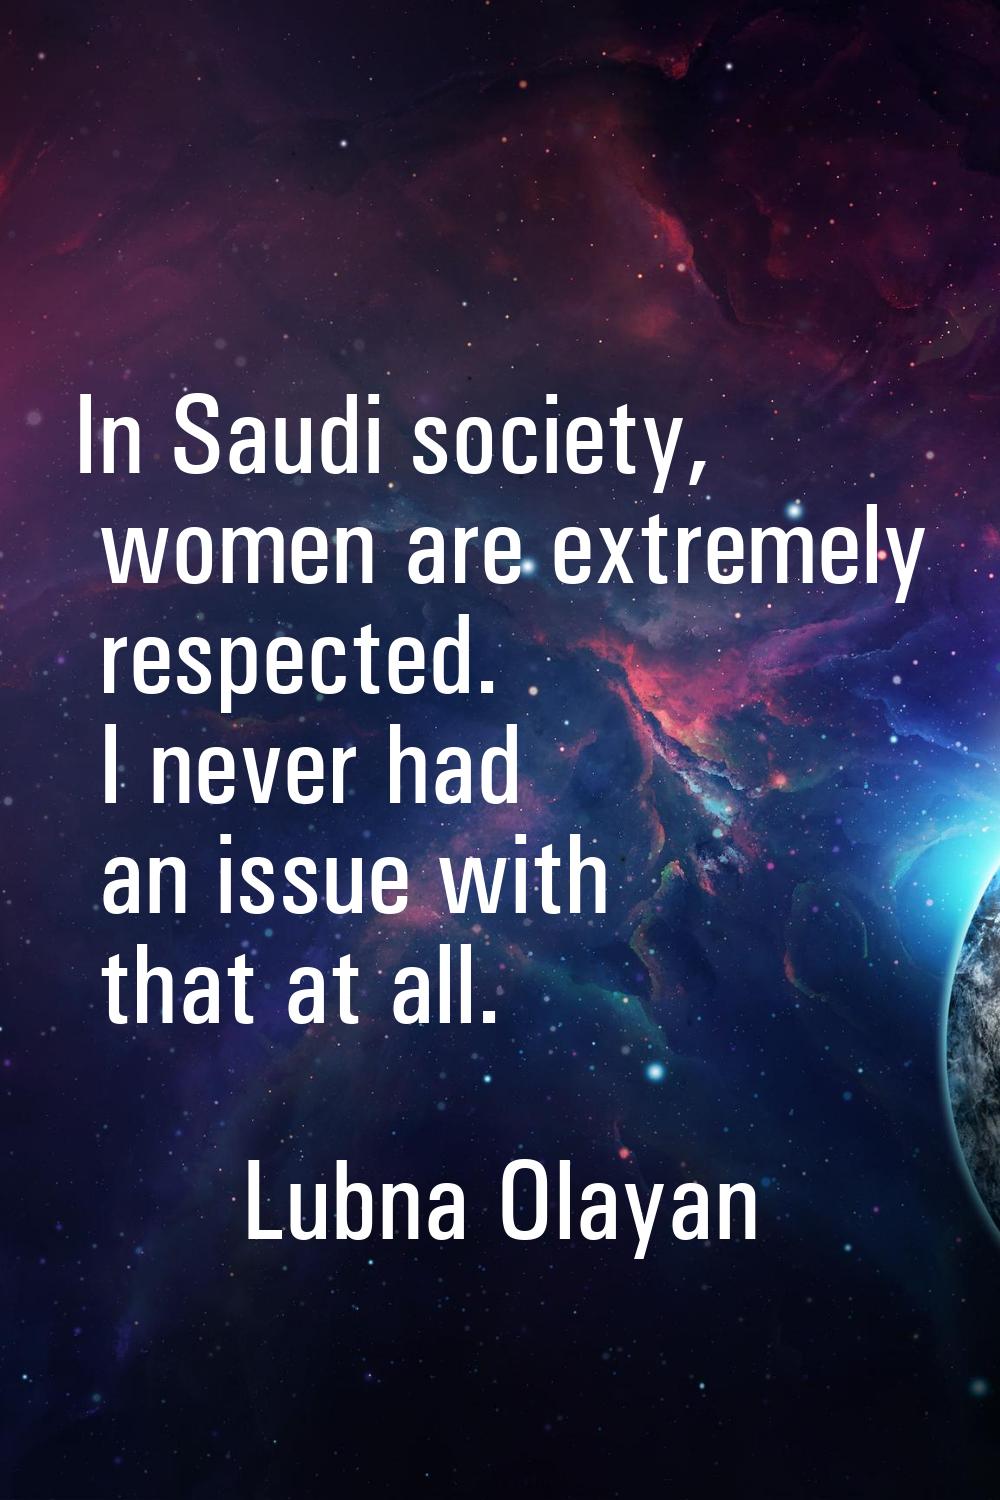 In Saudi society, women are extremely respected. I never had an issue with that at all.